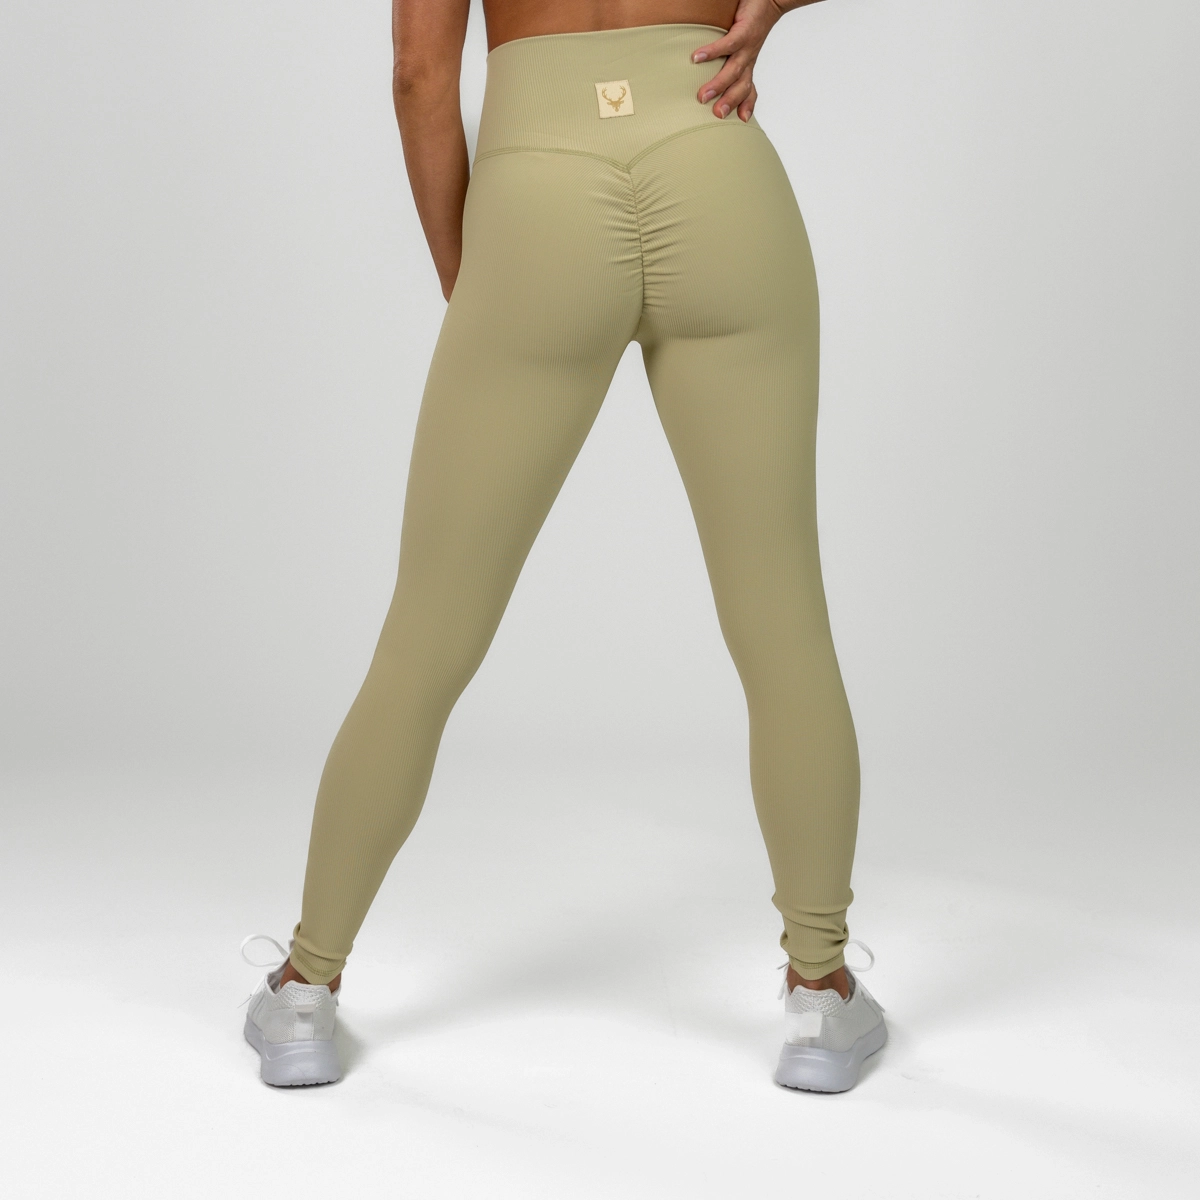 Wholesale Stylish Patterned Comfy Activewear Seamless Scrunch Butt